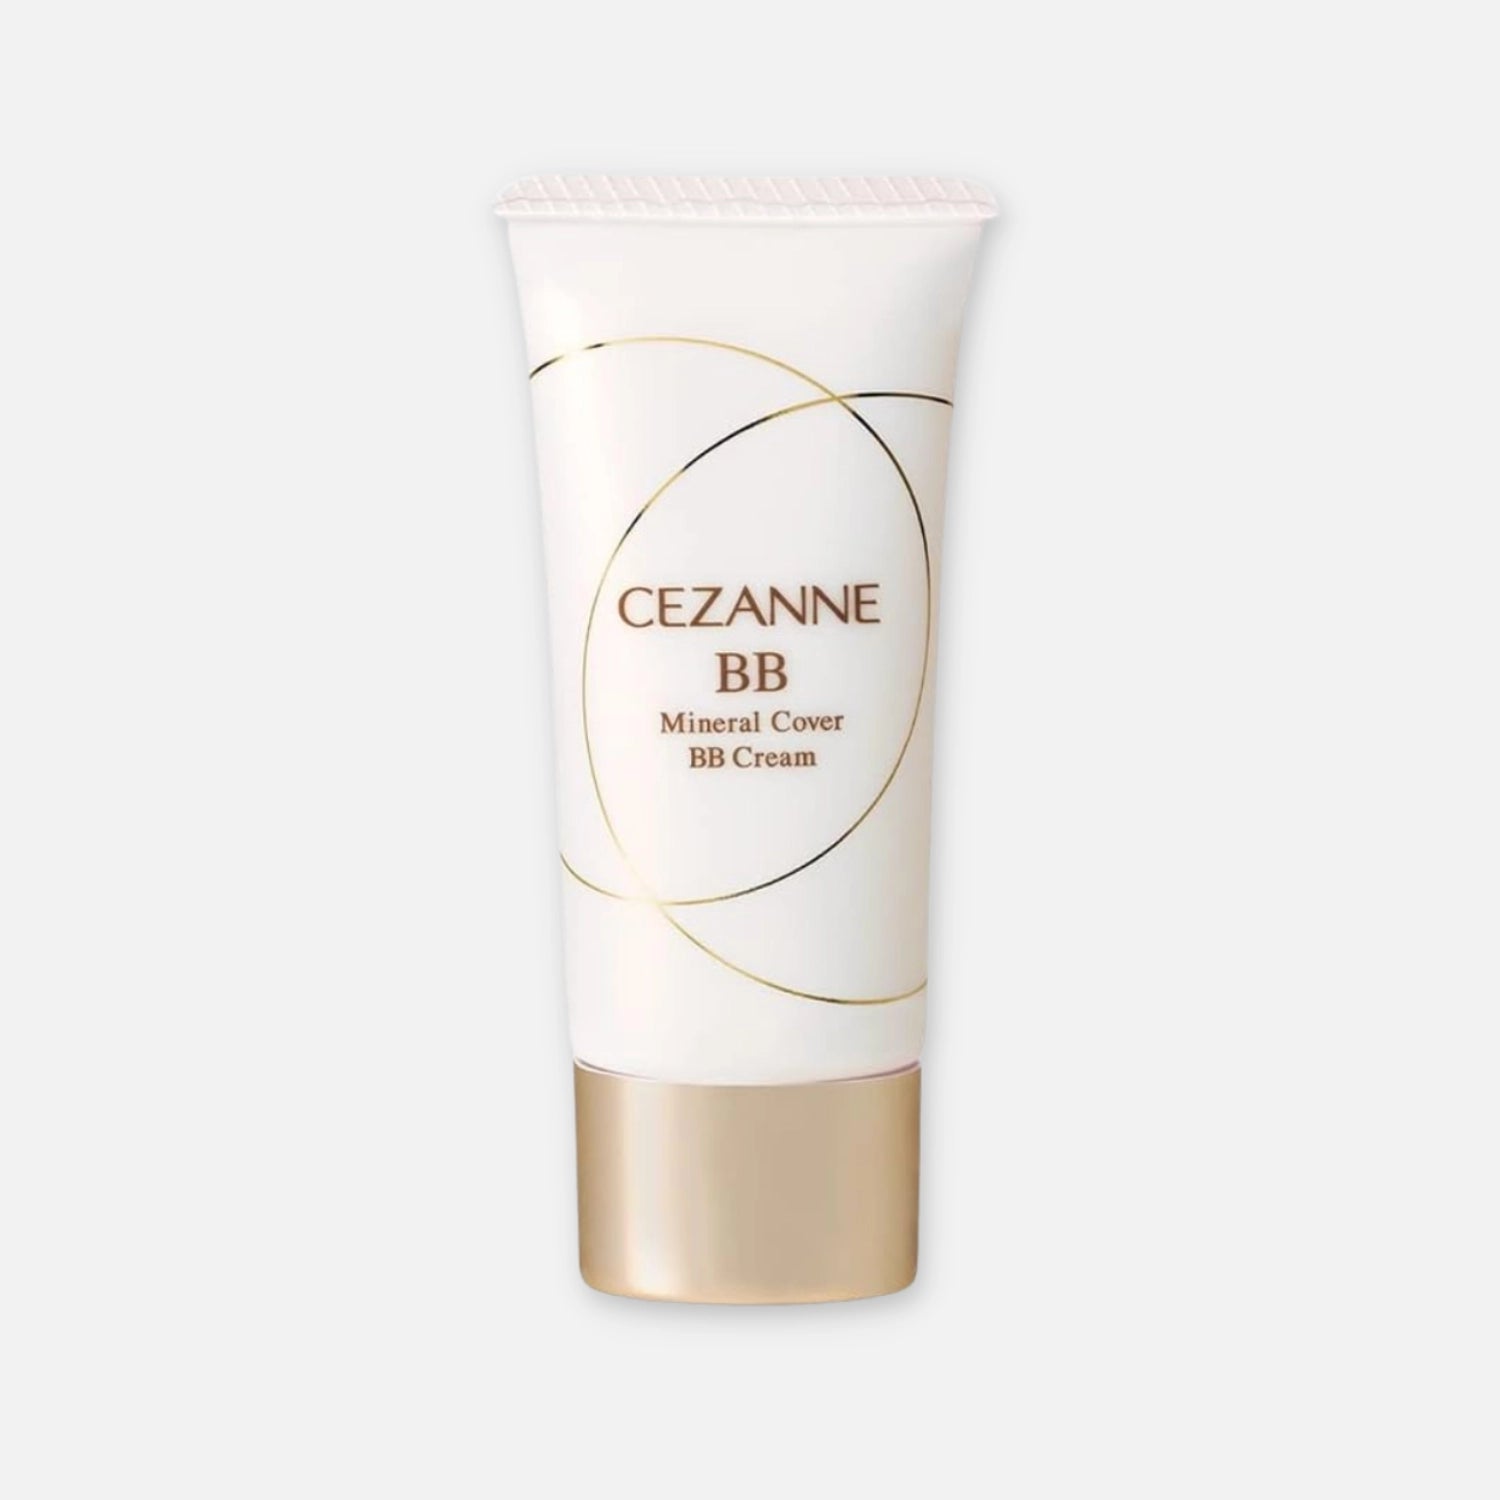 Cezanne Mineral Cover BB Cream SPF 29 PA+++ 30ml - Buy Me Japan